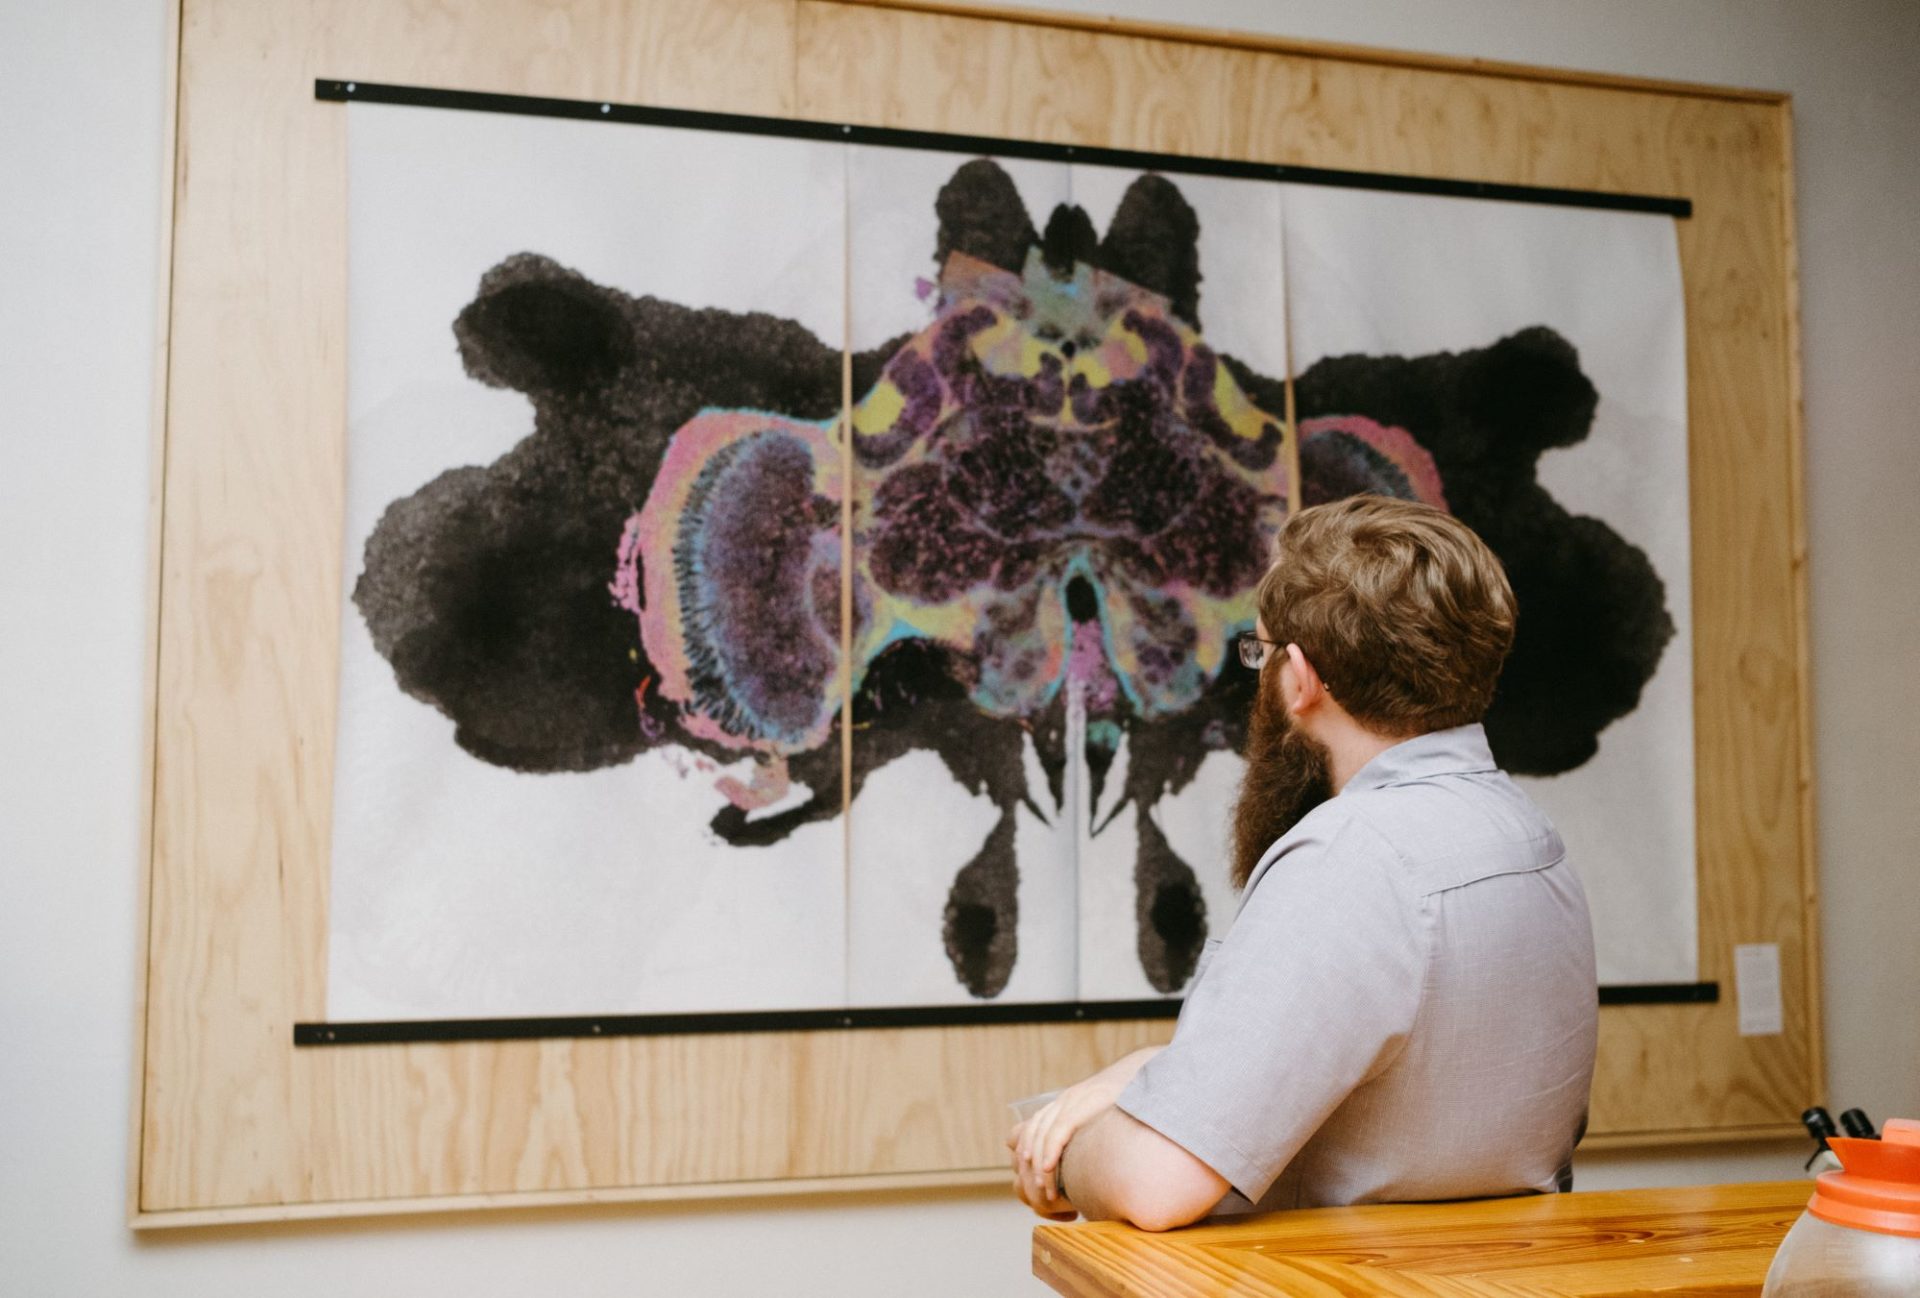 A large printed image, reminiscent of a Rorshach test, with a white backround. It is hanging on a wooden backdrop. A man with long beard and glasses is leaning against a wooden countertop and looking at the image.